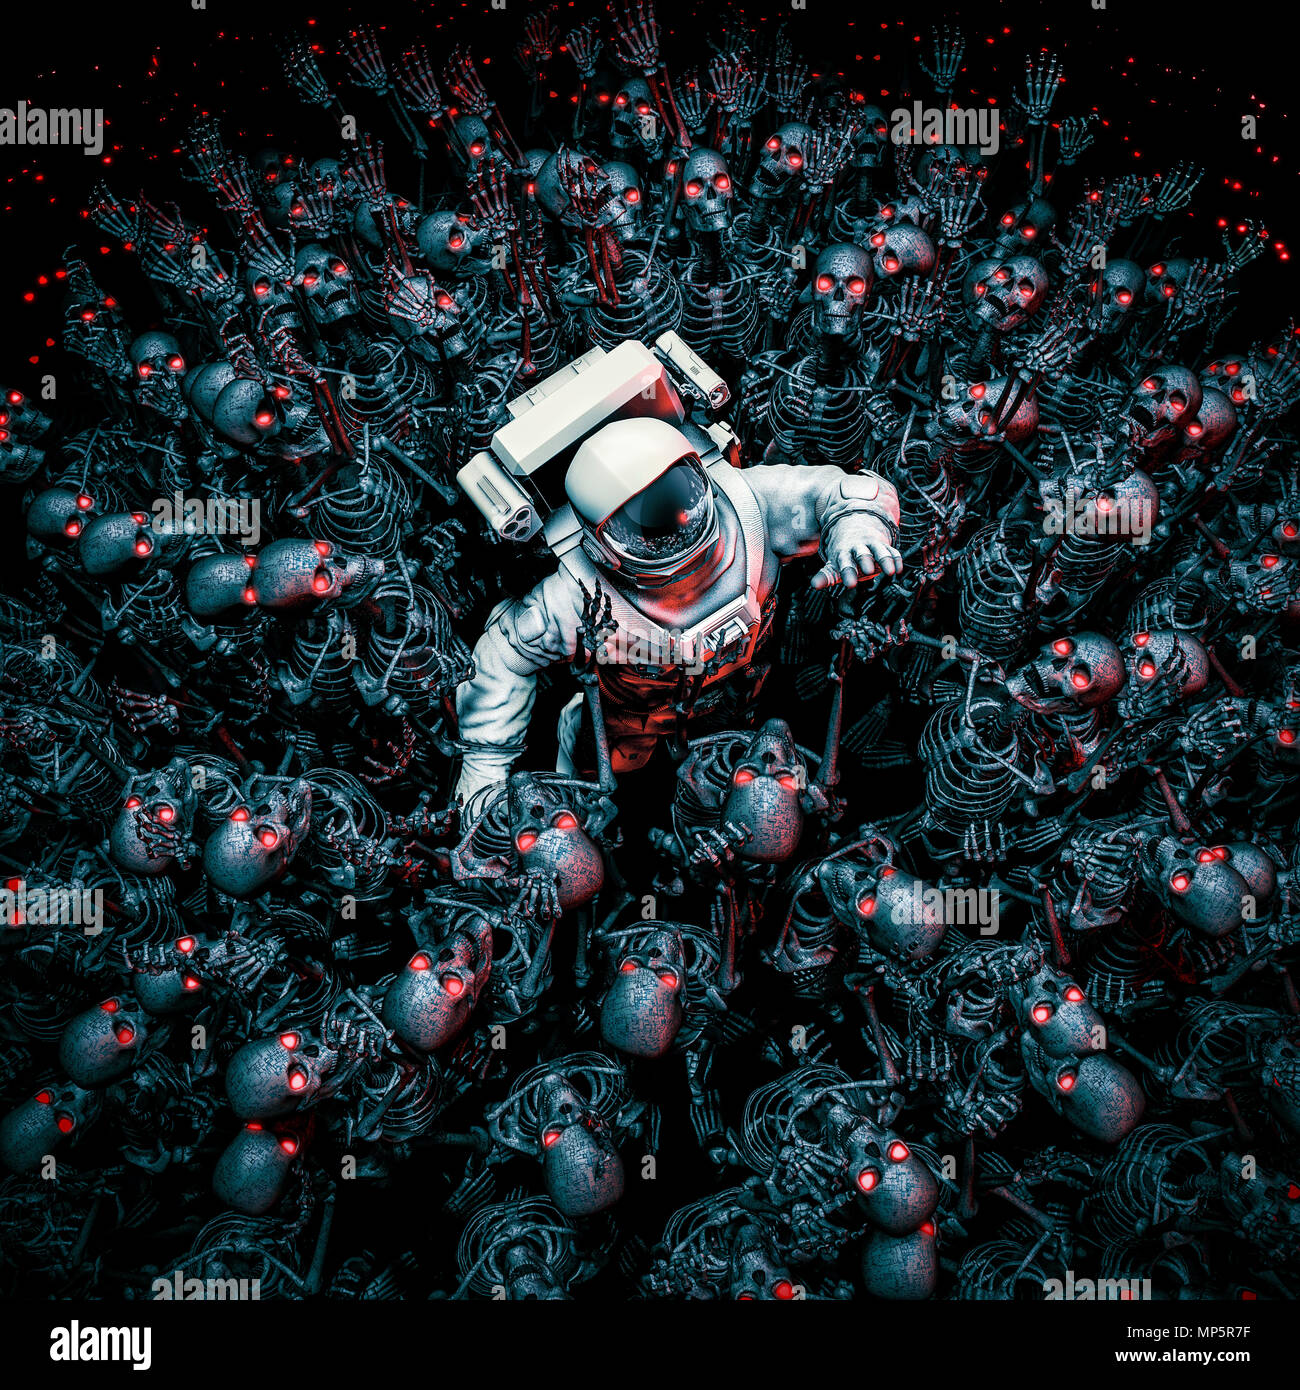 Planet of terror / 3D illustration of astronaut surrounded by a horde of robot zombie skeletons Stock Photo